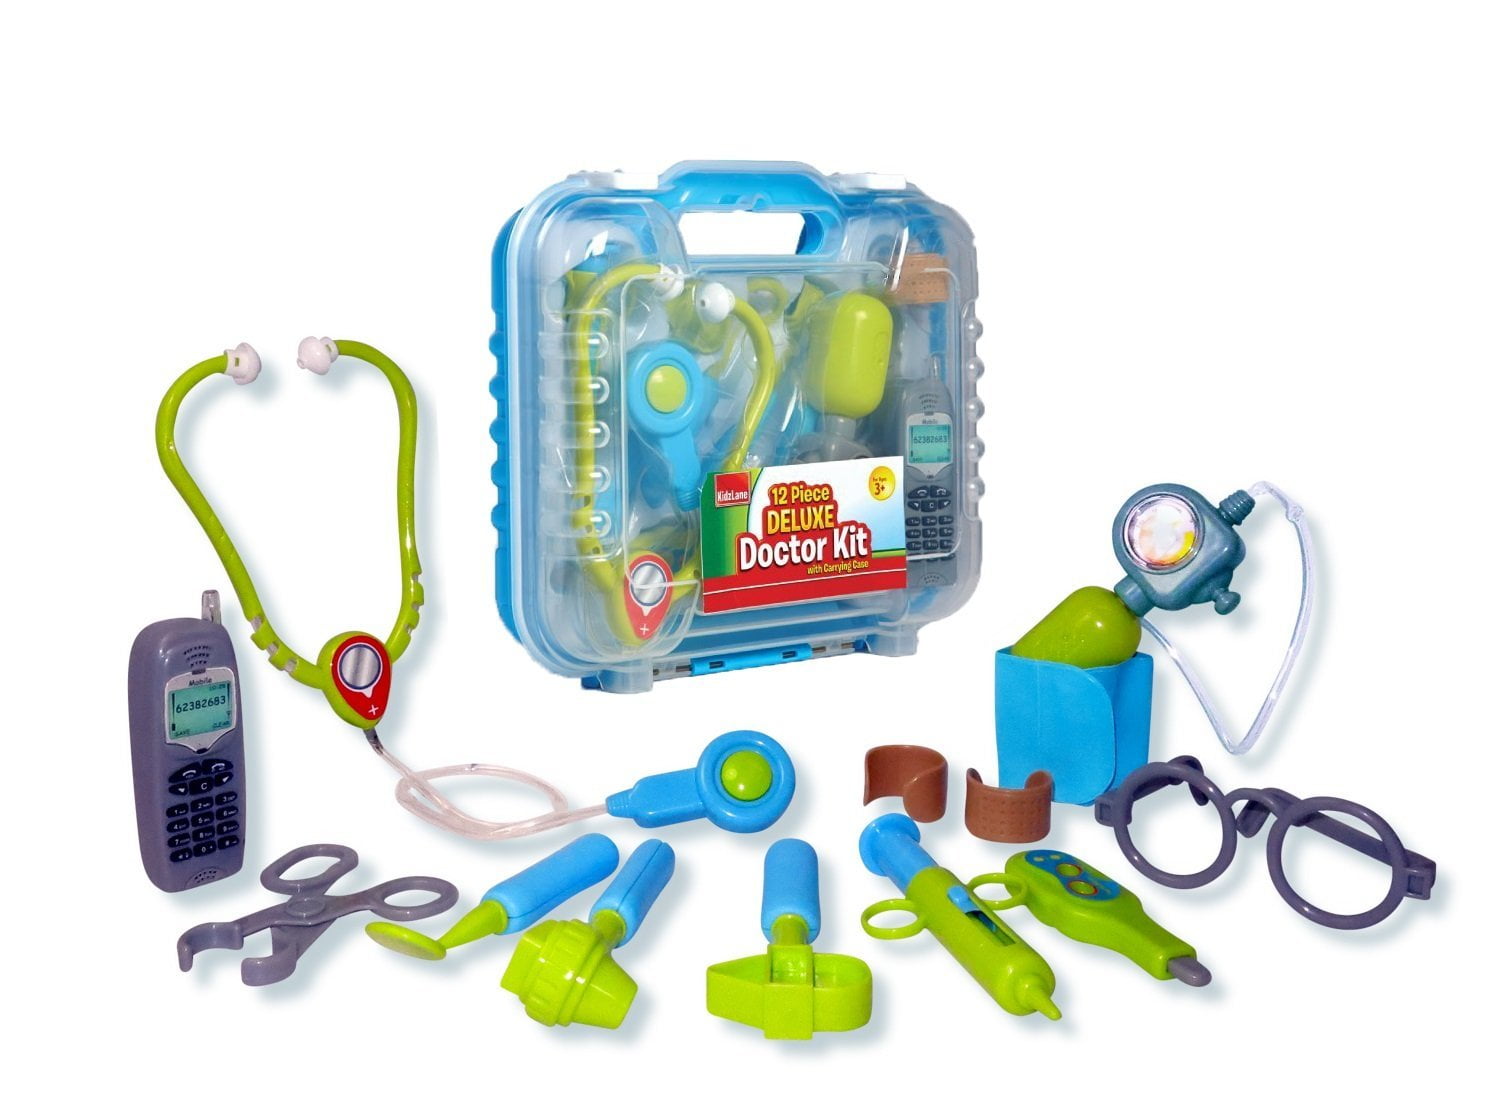 KIDS DOCTOR SET NURSE PRETEND PLAY ACCESSORY KIT TOOLS CARRY CASE TOYS XMAS GIFT 